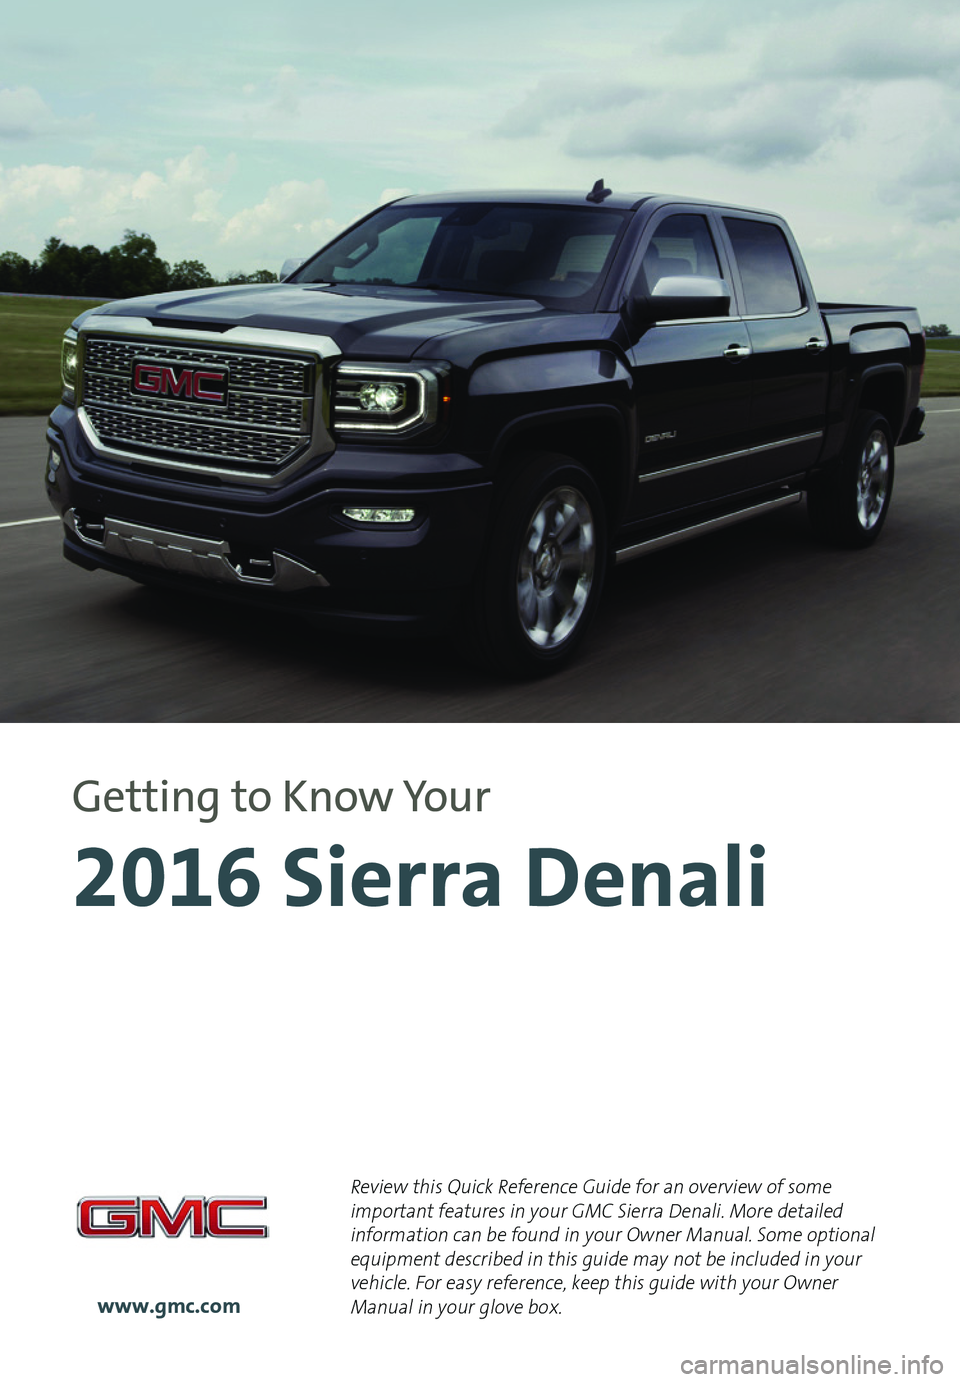 GMC SIERRA 2016  Get To Know Guide 1
Review this Quick Reference Guide for an overview of some important features in your GMC Sierra Denali. More detailed information can be found in your Owner Manual. Some optional equipment described